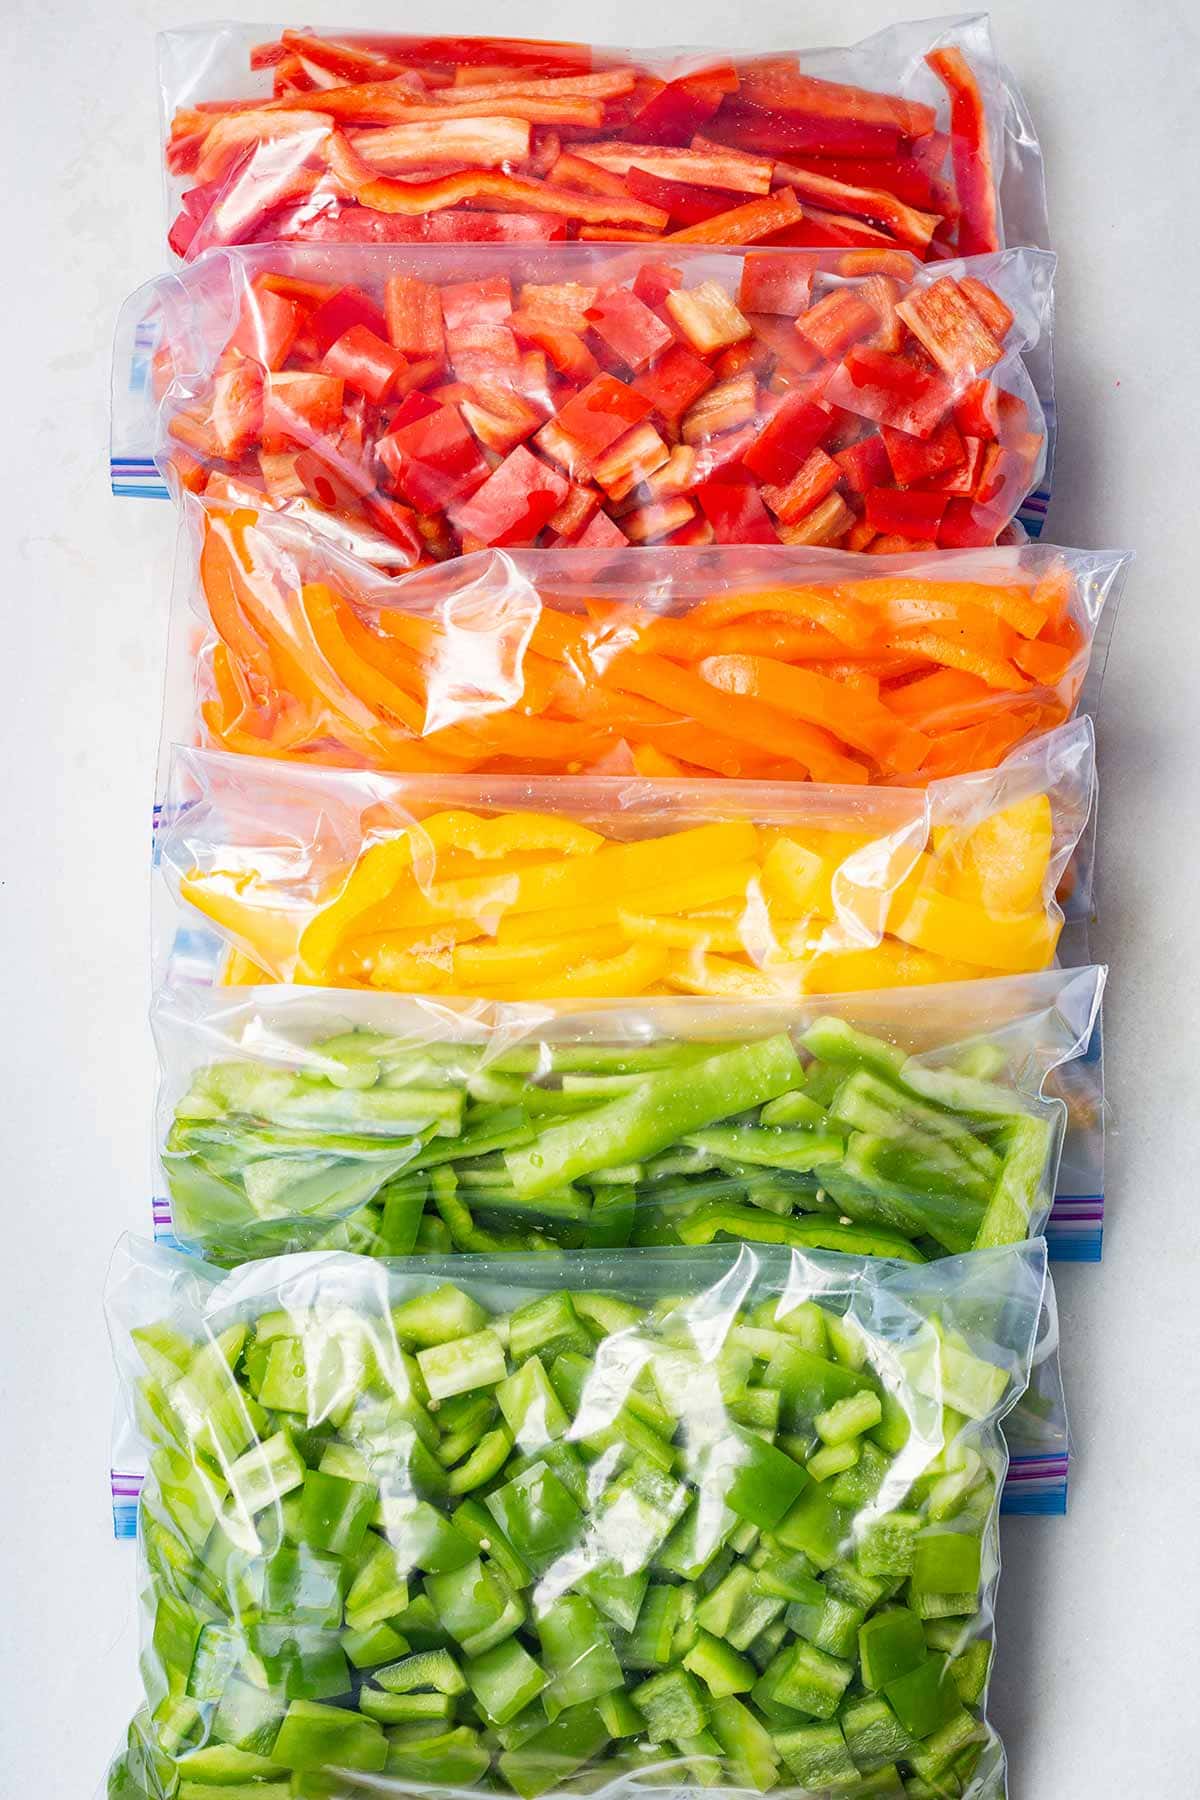 Bags of sliced and diced bell peppers ready for freezing.